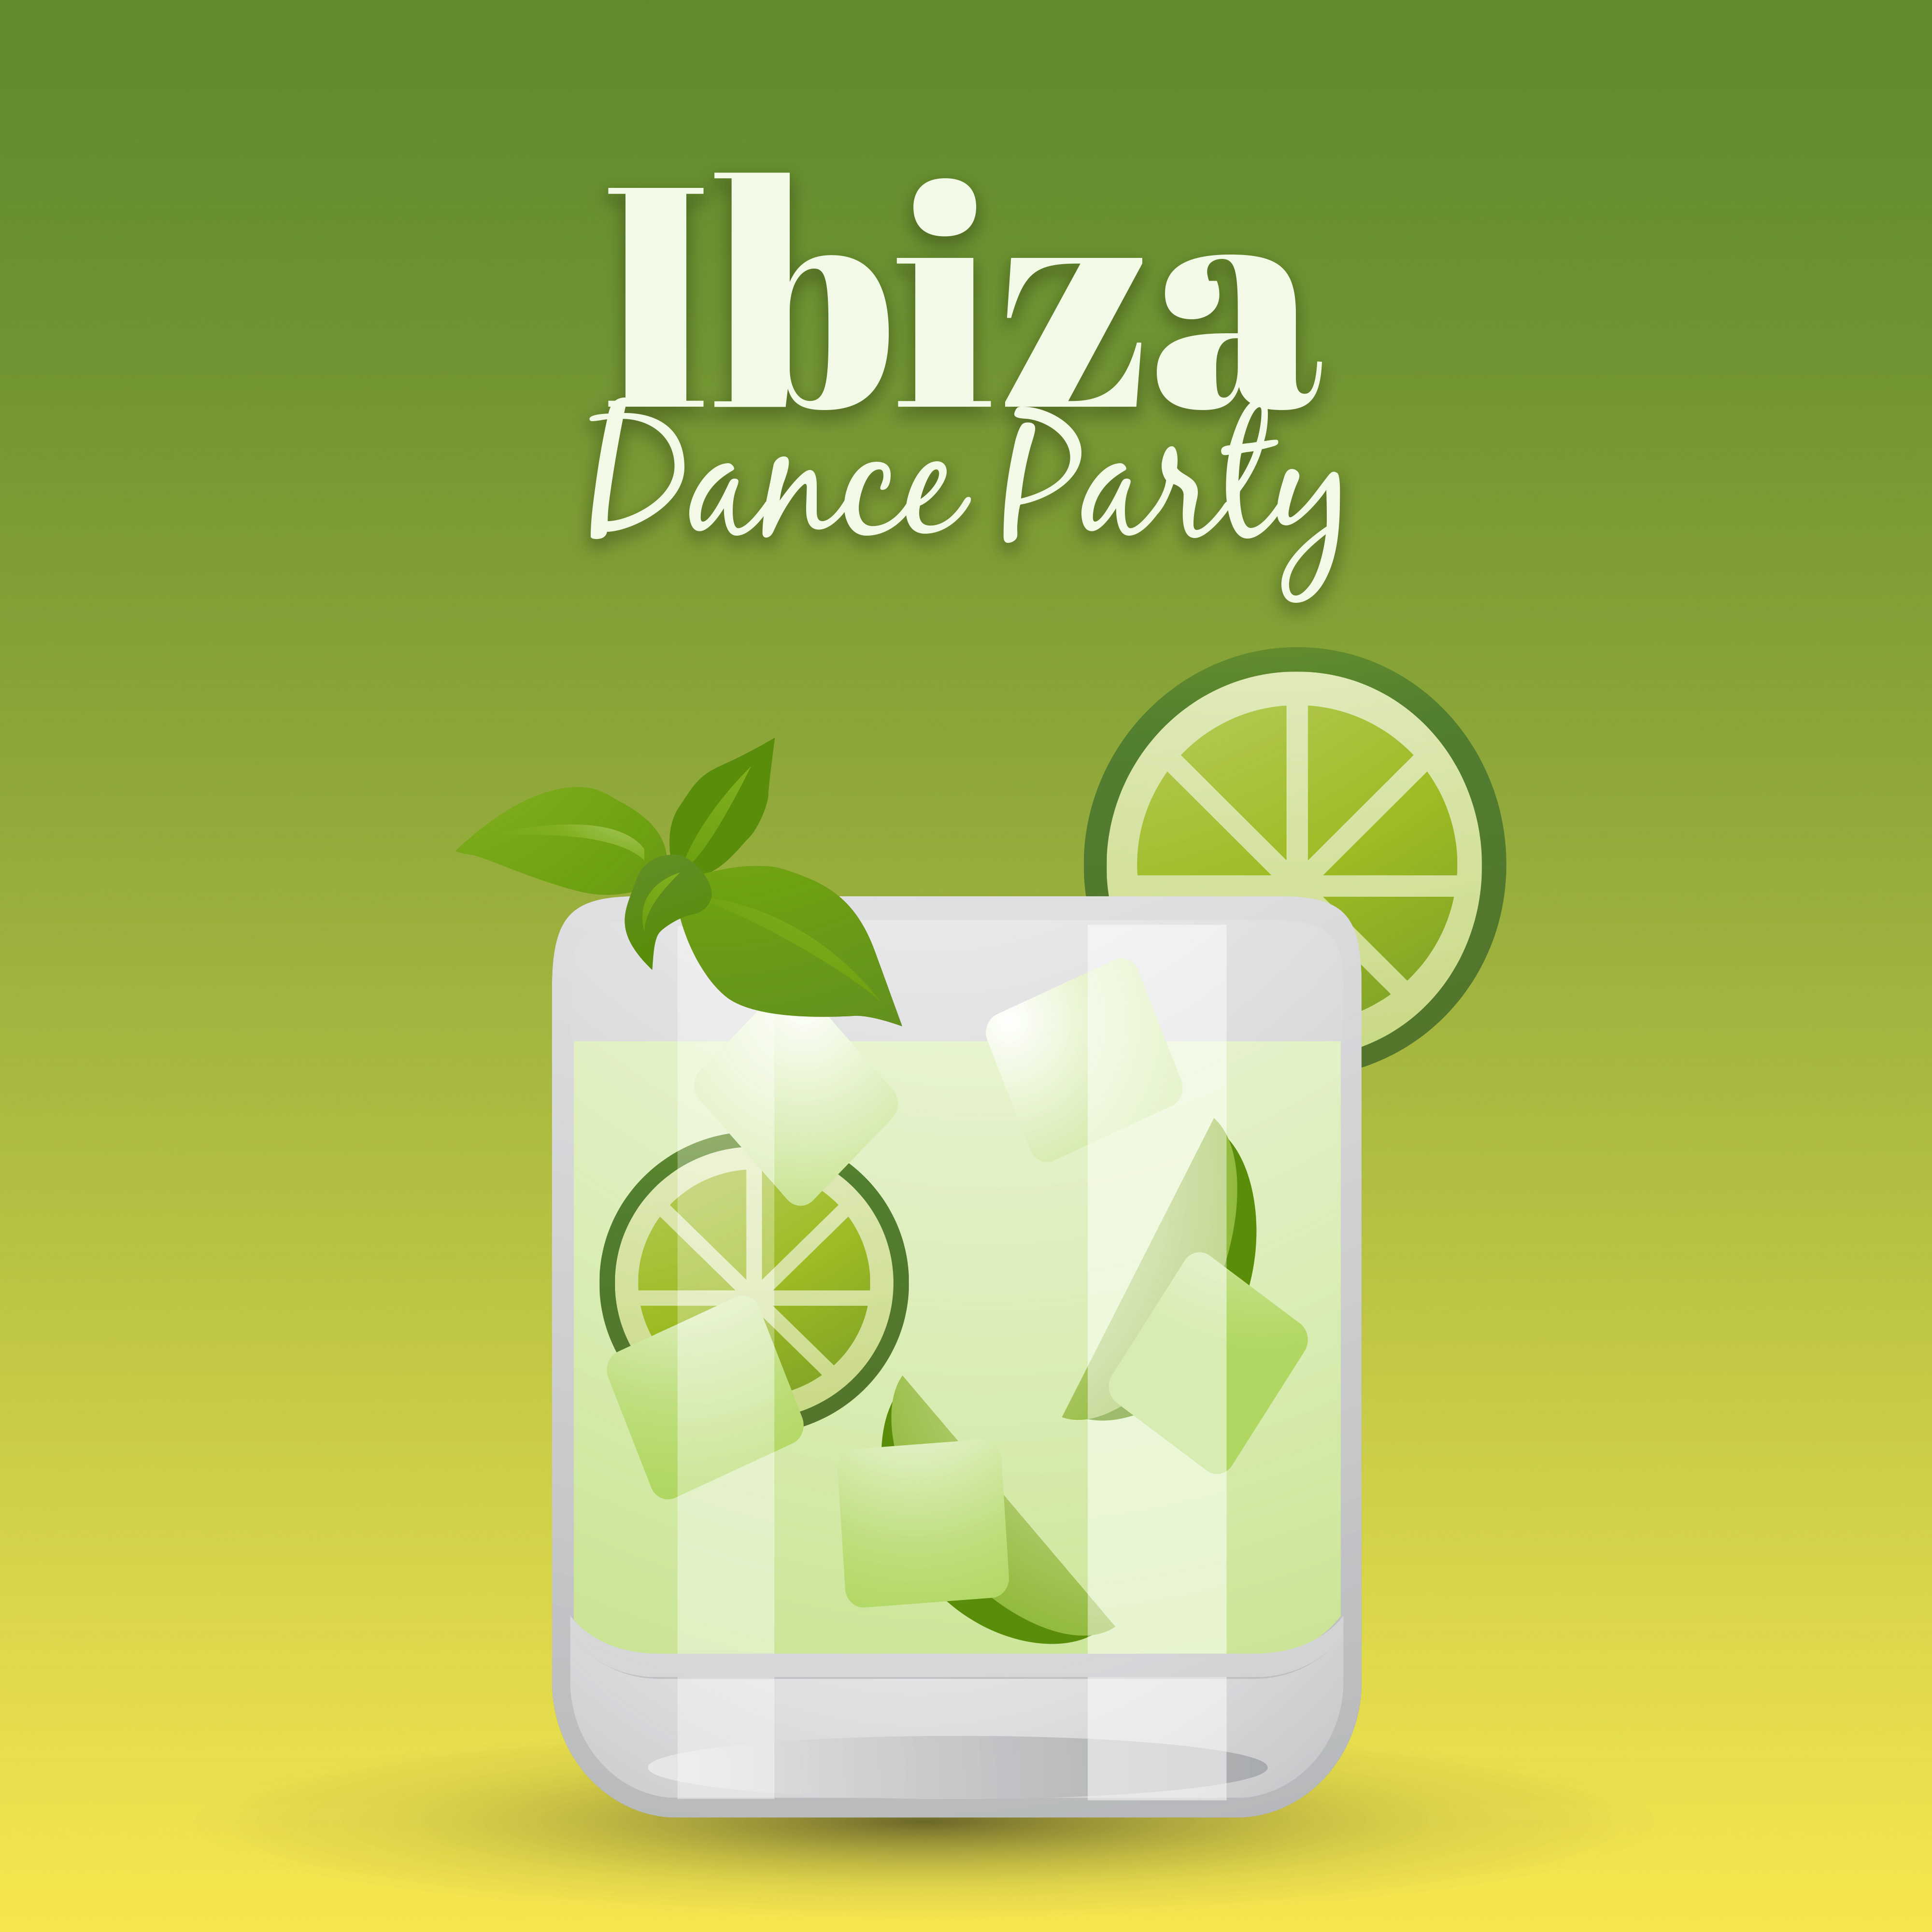 Ibiza Dance Party – Dance Music, Party Hits, Chill Out 2017, Electronic Beats, Holiday & Chill